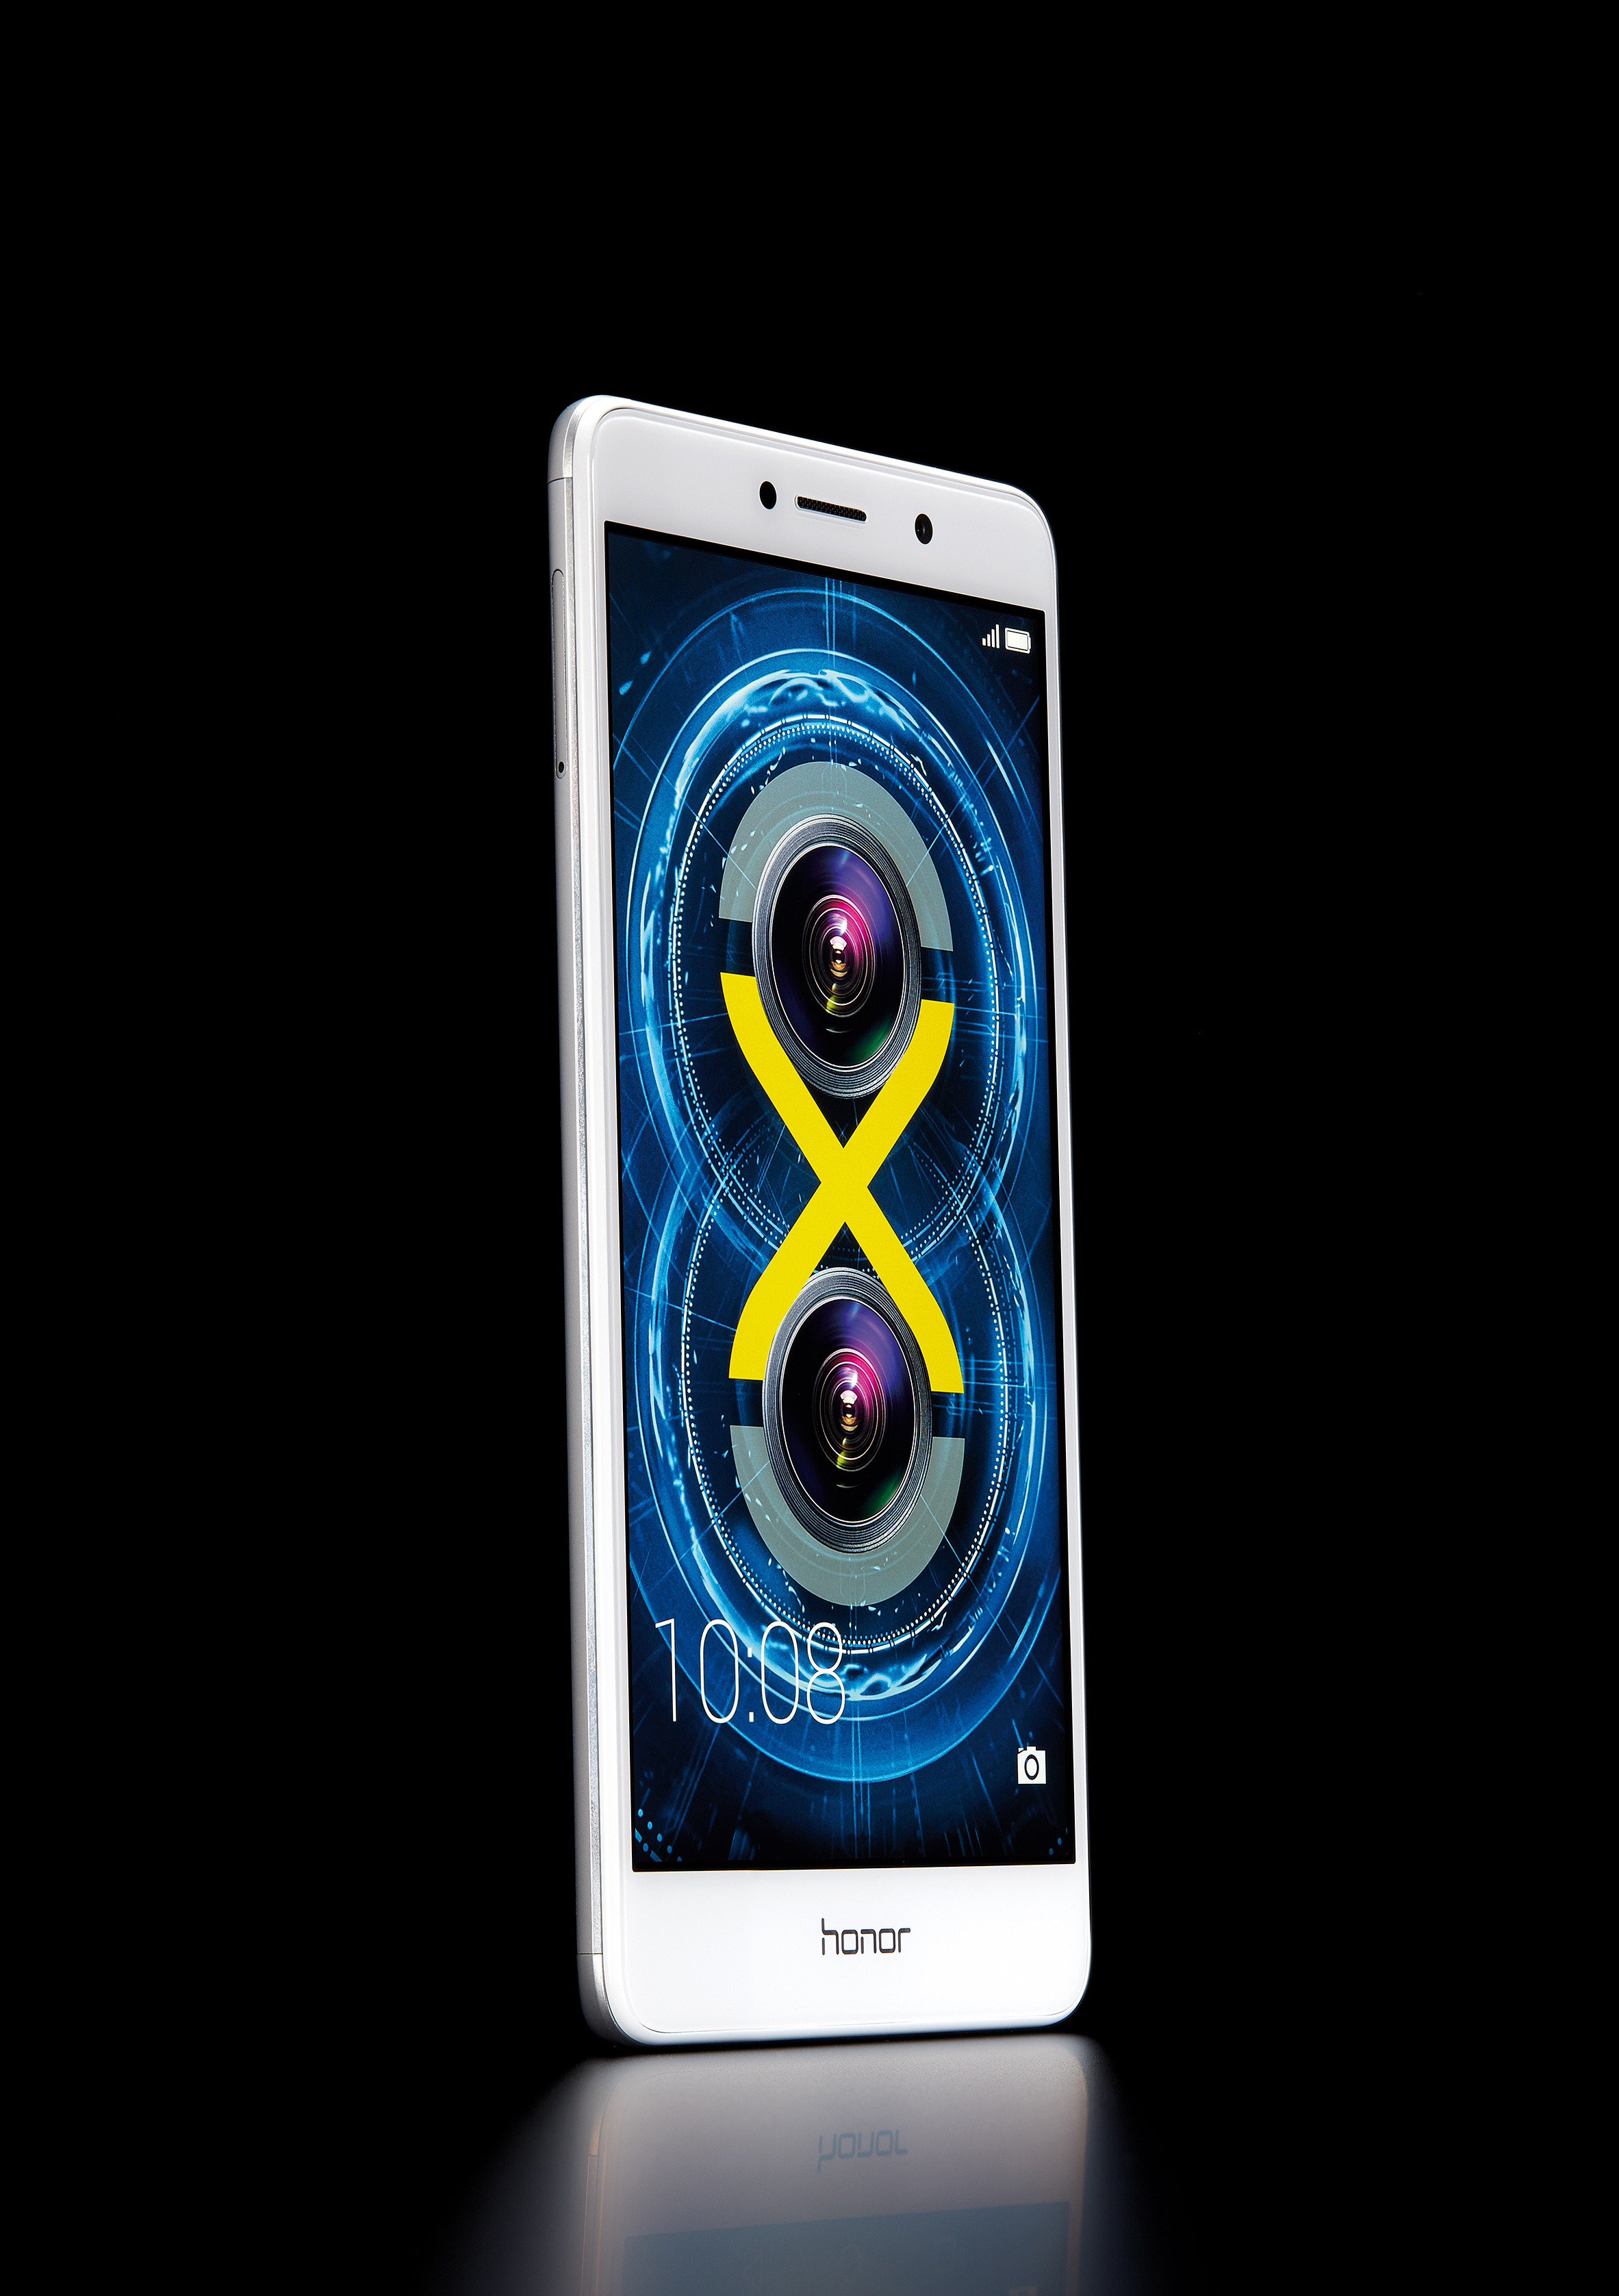 HONOR 6X now available at Target stores across the US - Android Authority